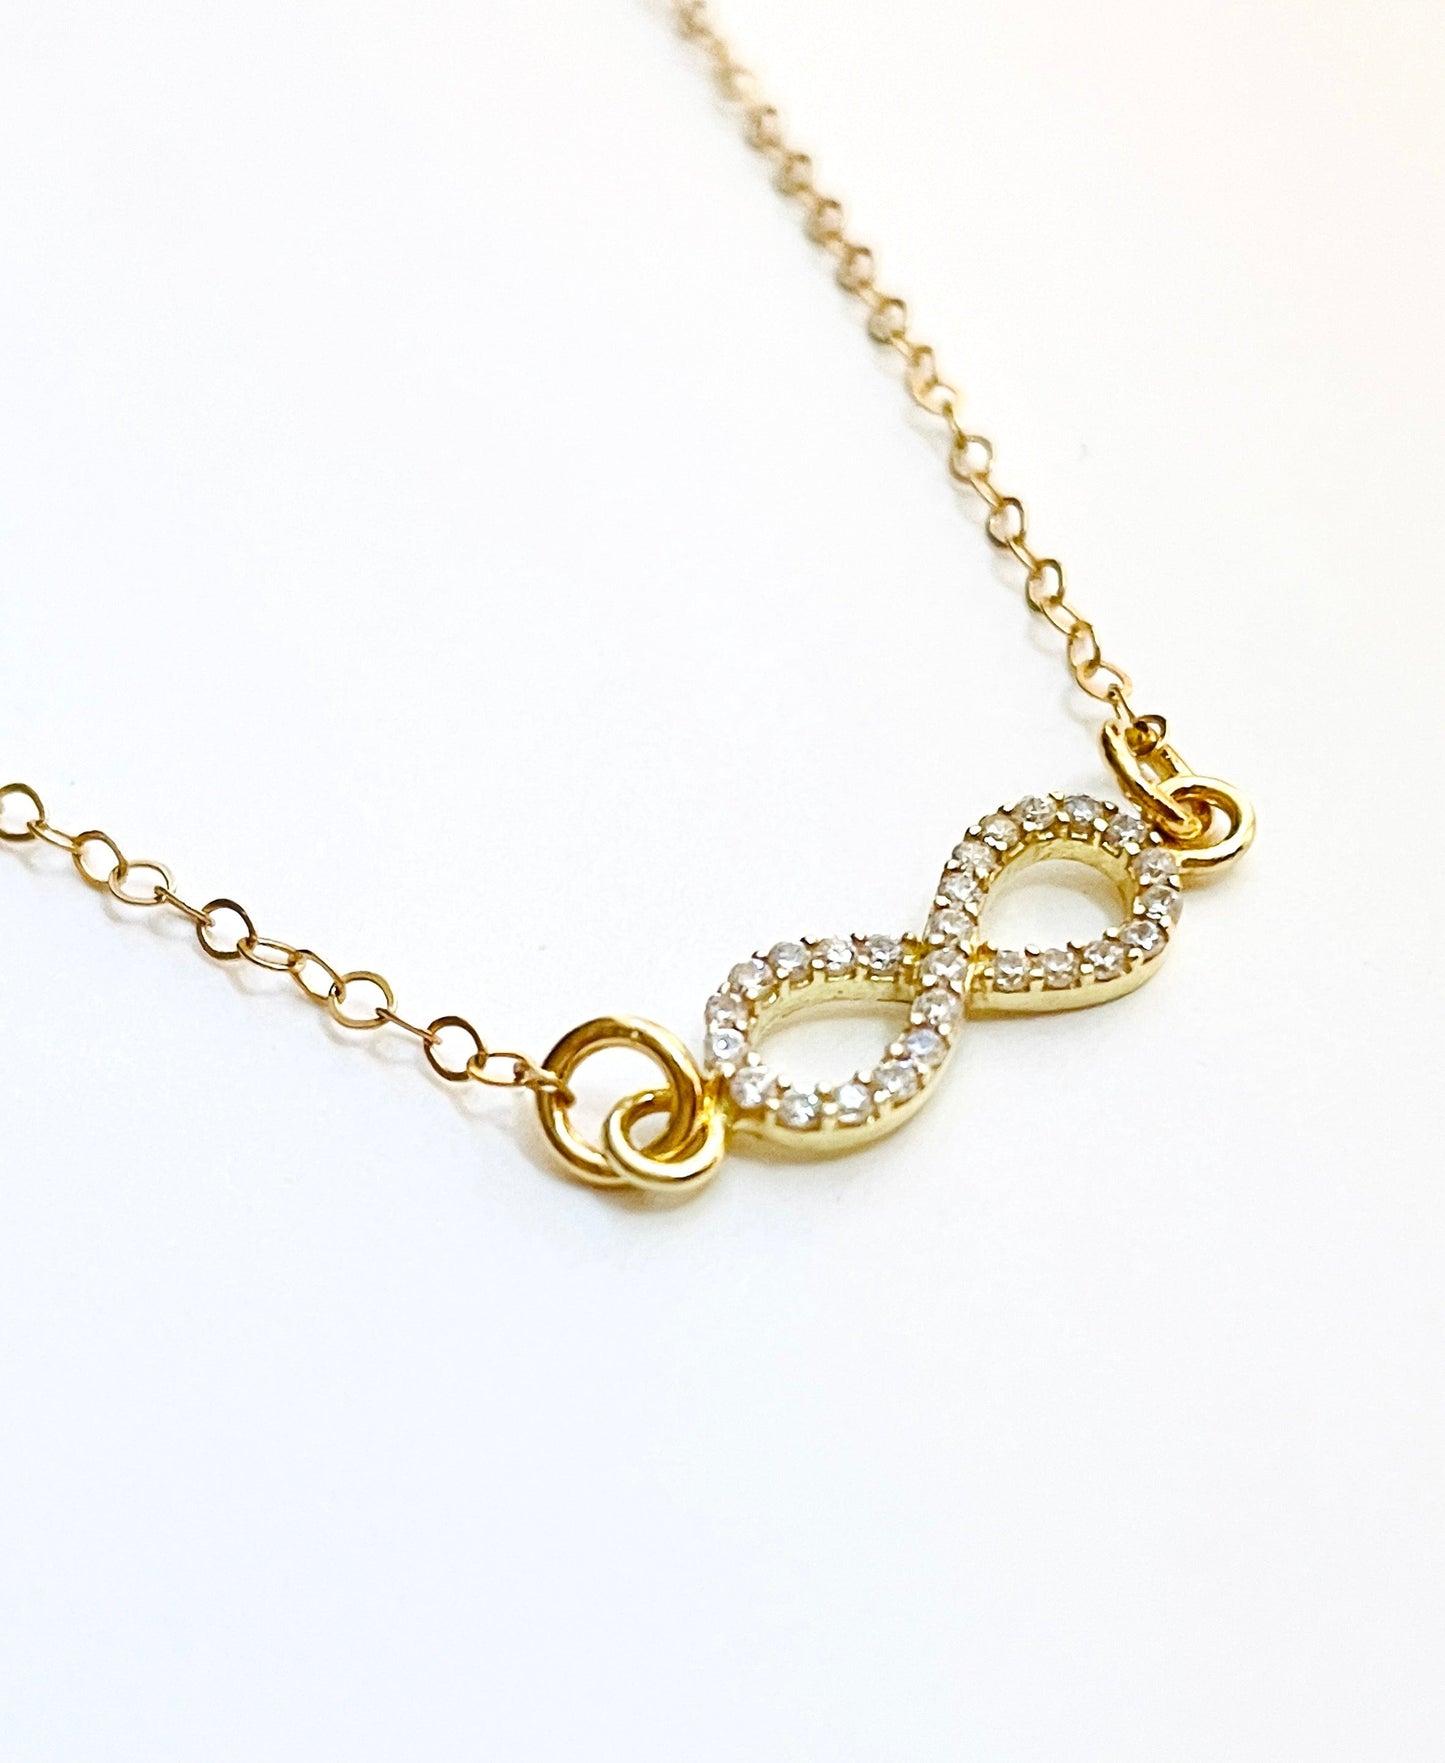 Encrusted Infinity Sign Necklace